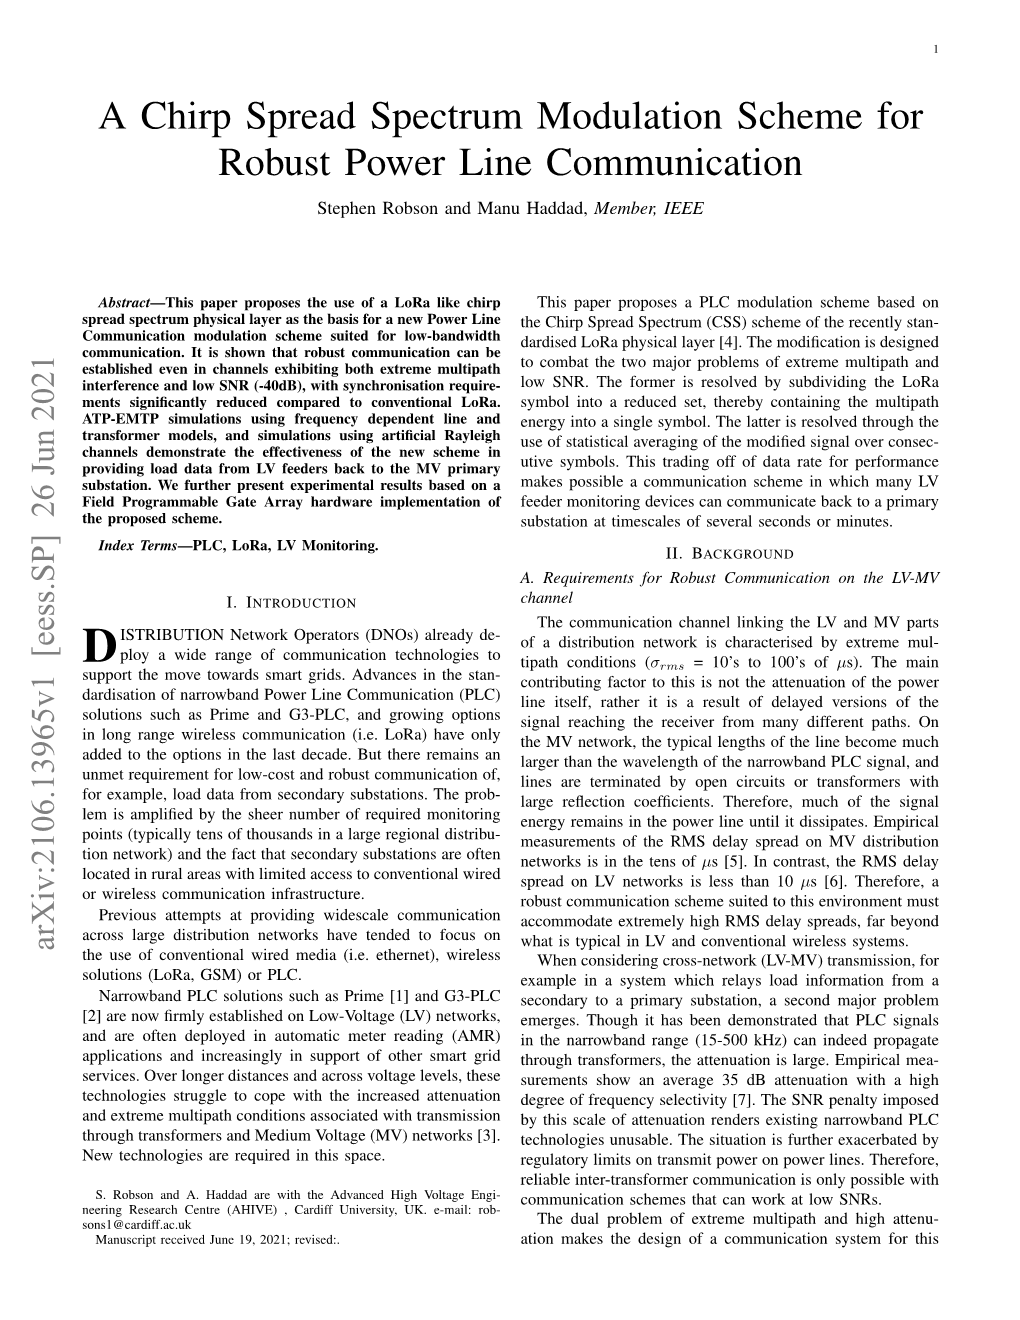 A Chirp Spread Spectrum Modulation Scheme for Robust Power Line Communication Stephen Robson and Manu Haddad, Member, IEEE